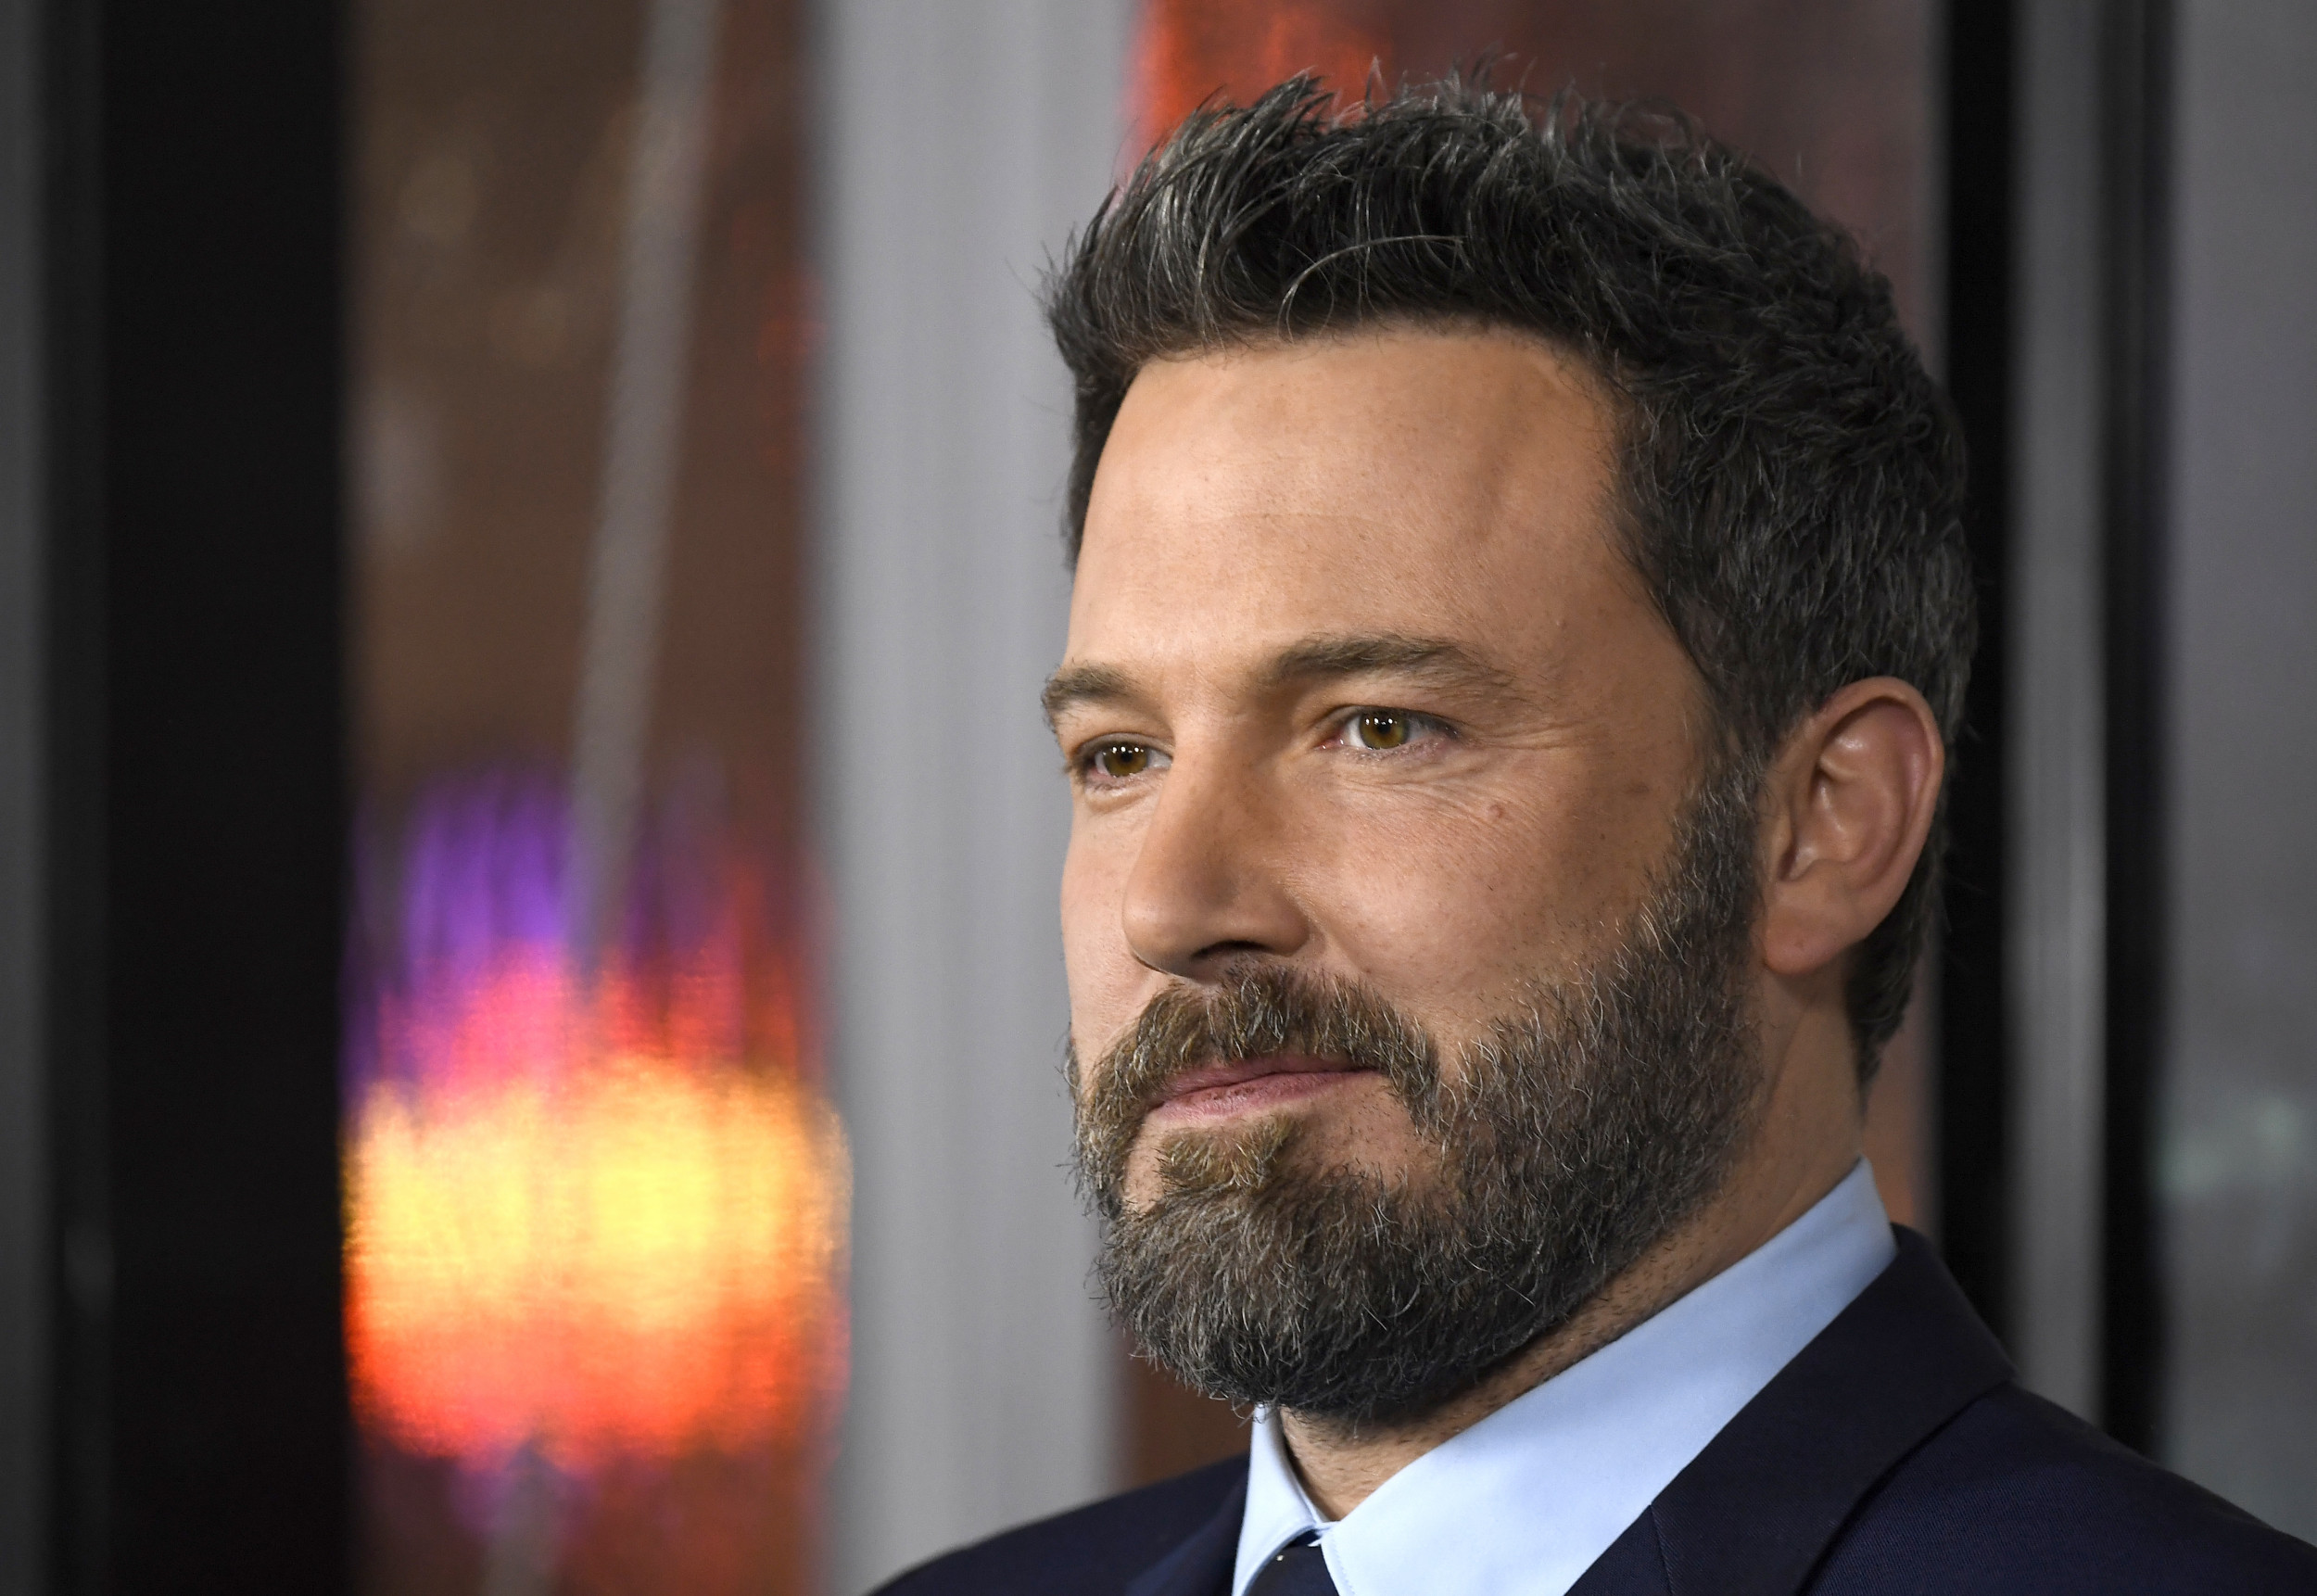 Photo by Ben Affleck Juggling Dunkin Donuts Iced Coffees Inspire Wave of 2020 Memes